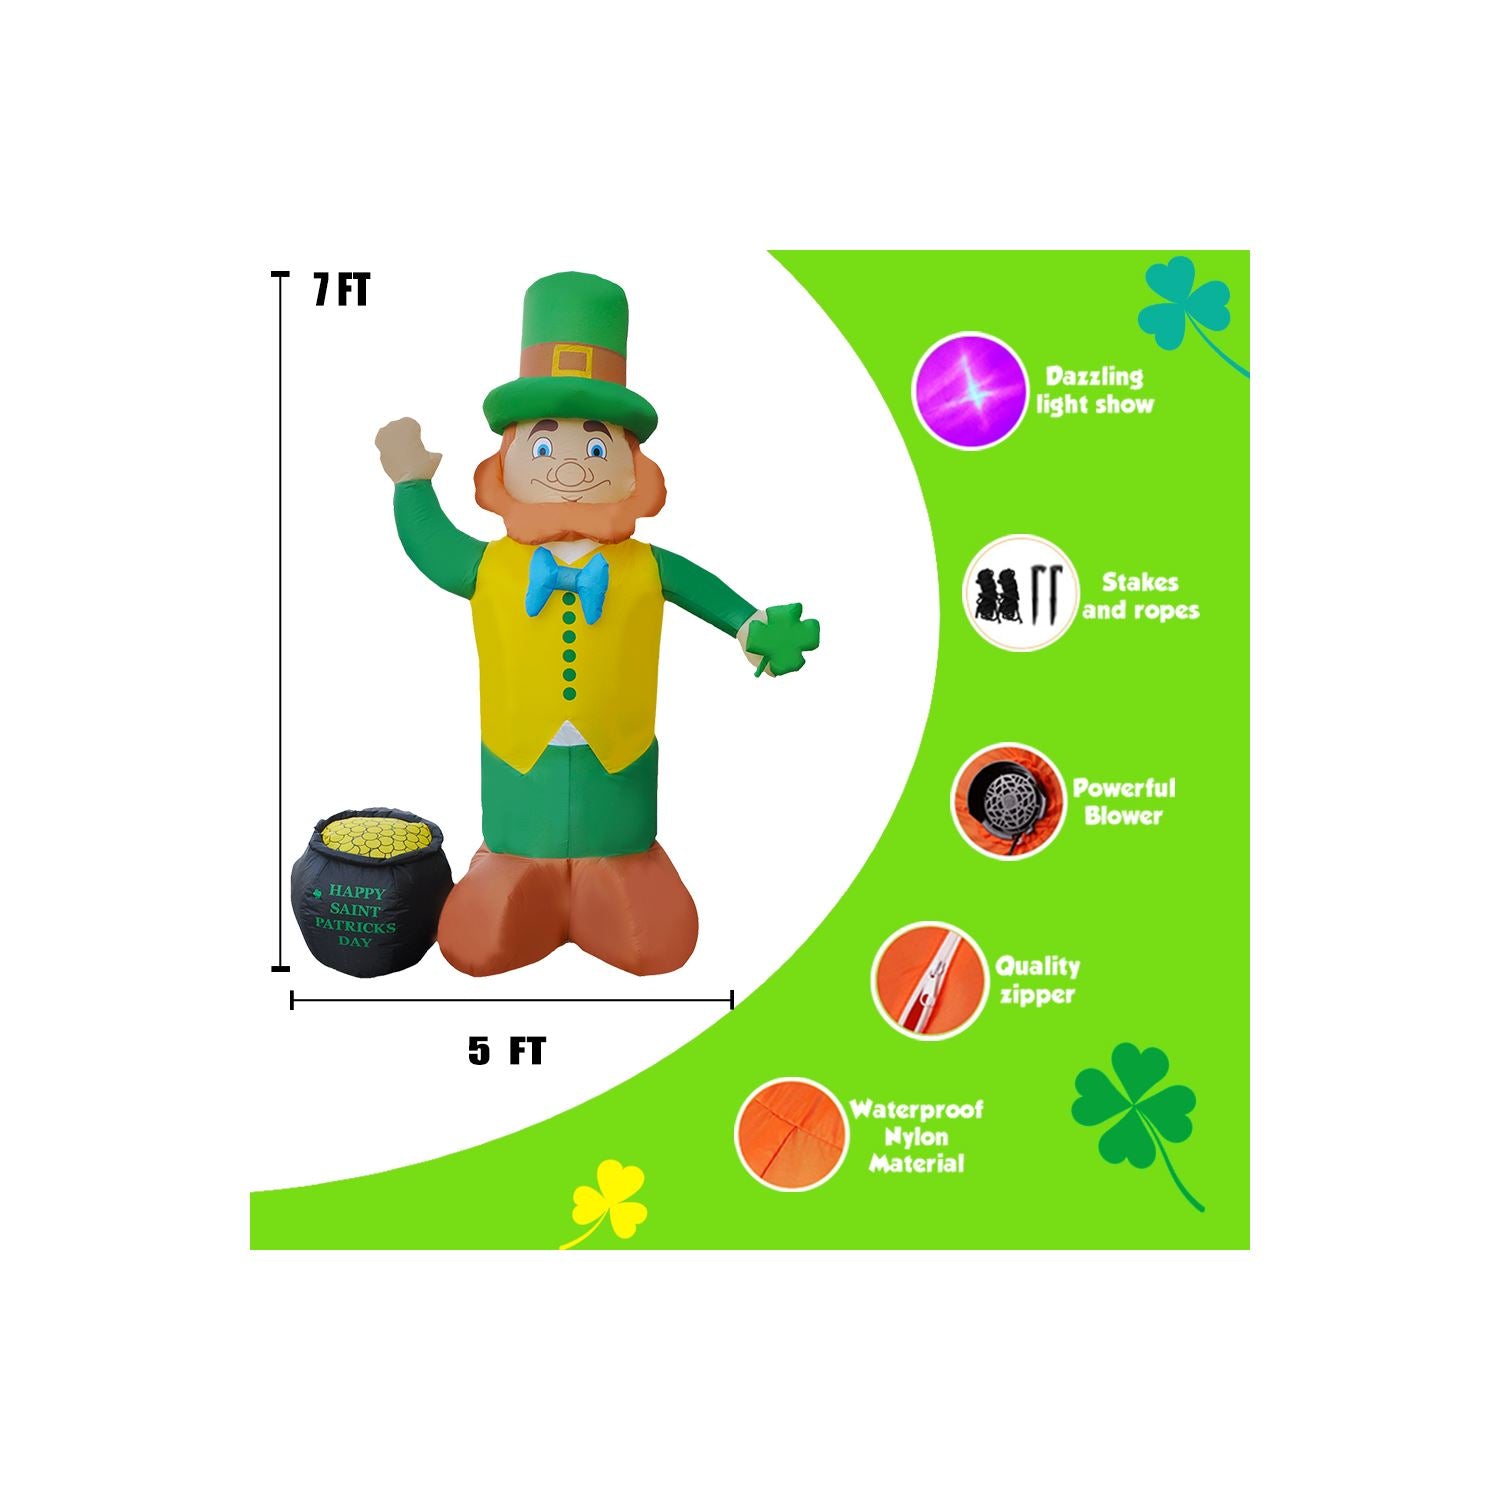 7Ft Seasonblow Inflatable St. Patrick with a purse.